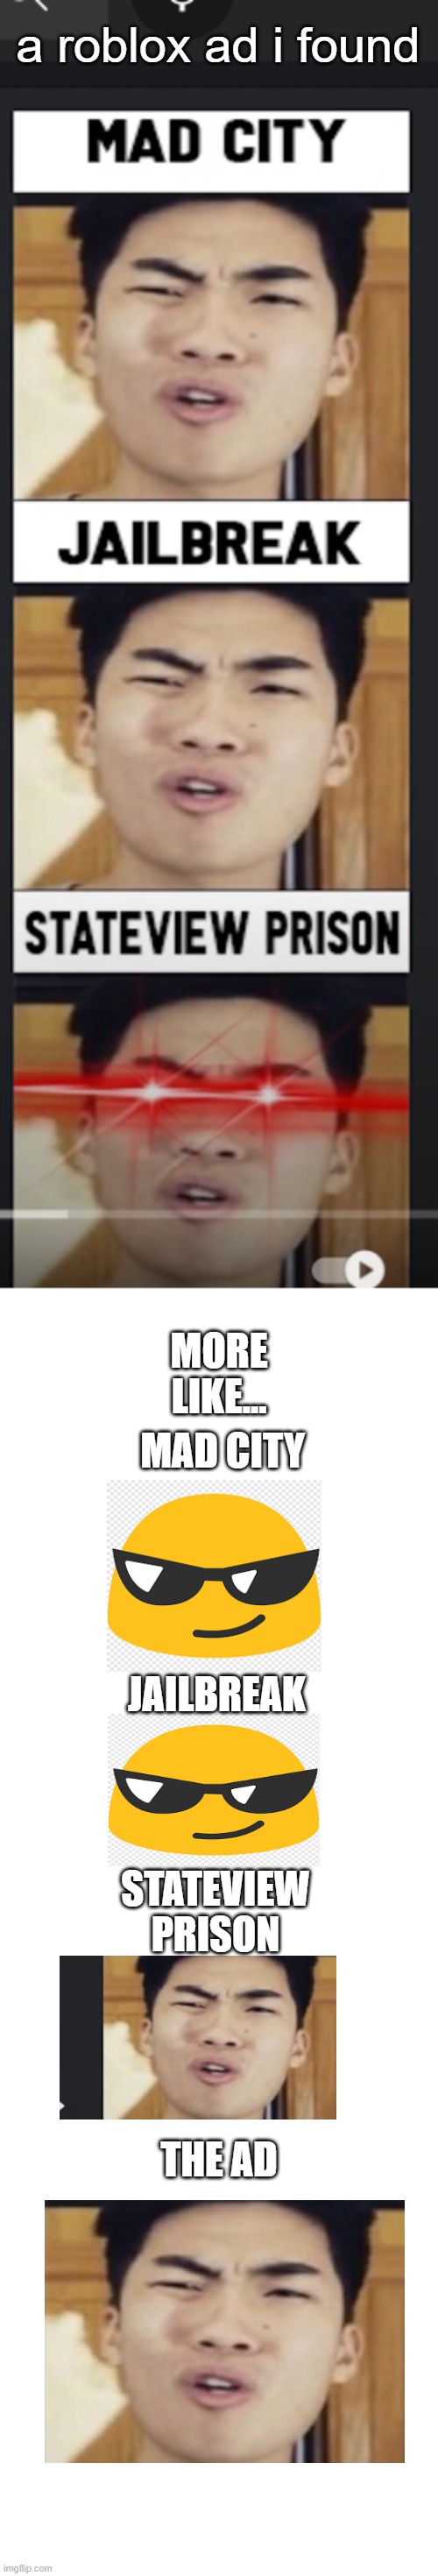 a bad roblox ad i found | a roblox ad i found; MORE LIKE... MAD CITY; JAILBREAK; STATEVIEW PRISON; THE AD | image tagged in cringe,bad,roblox ads,memes | made w/ Imgflip meme maker